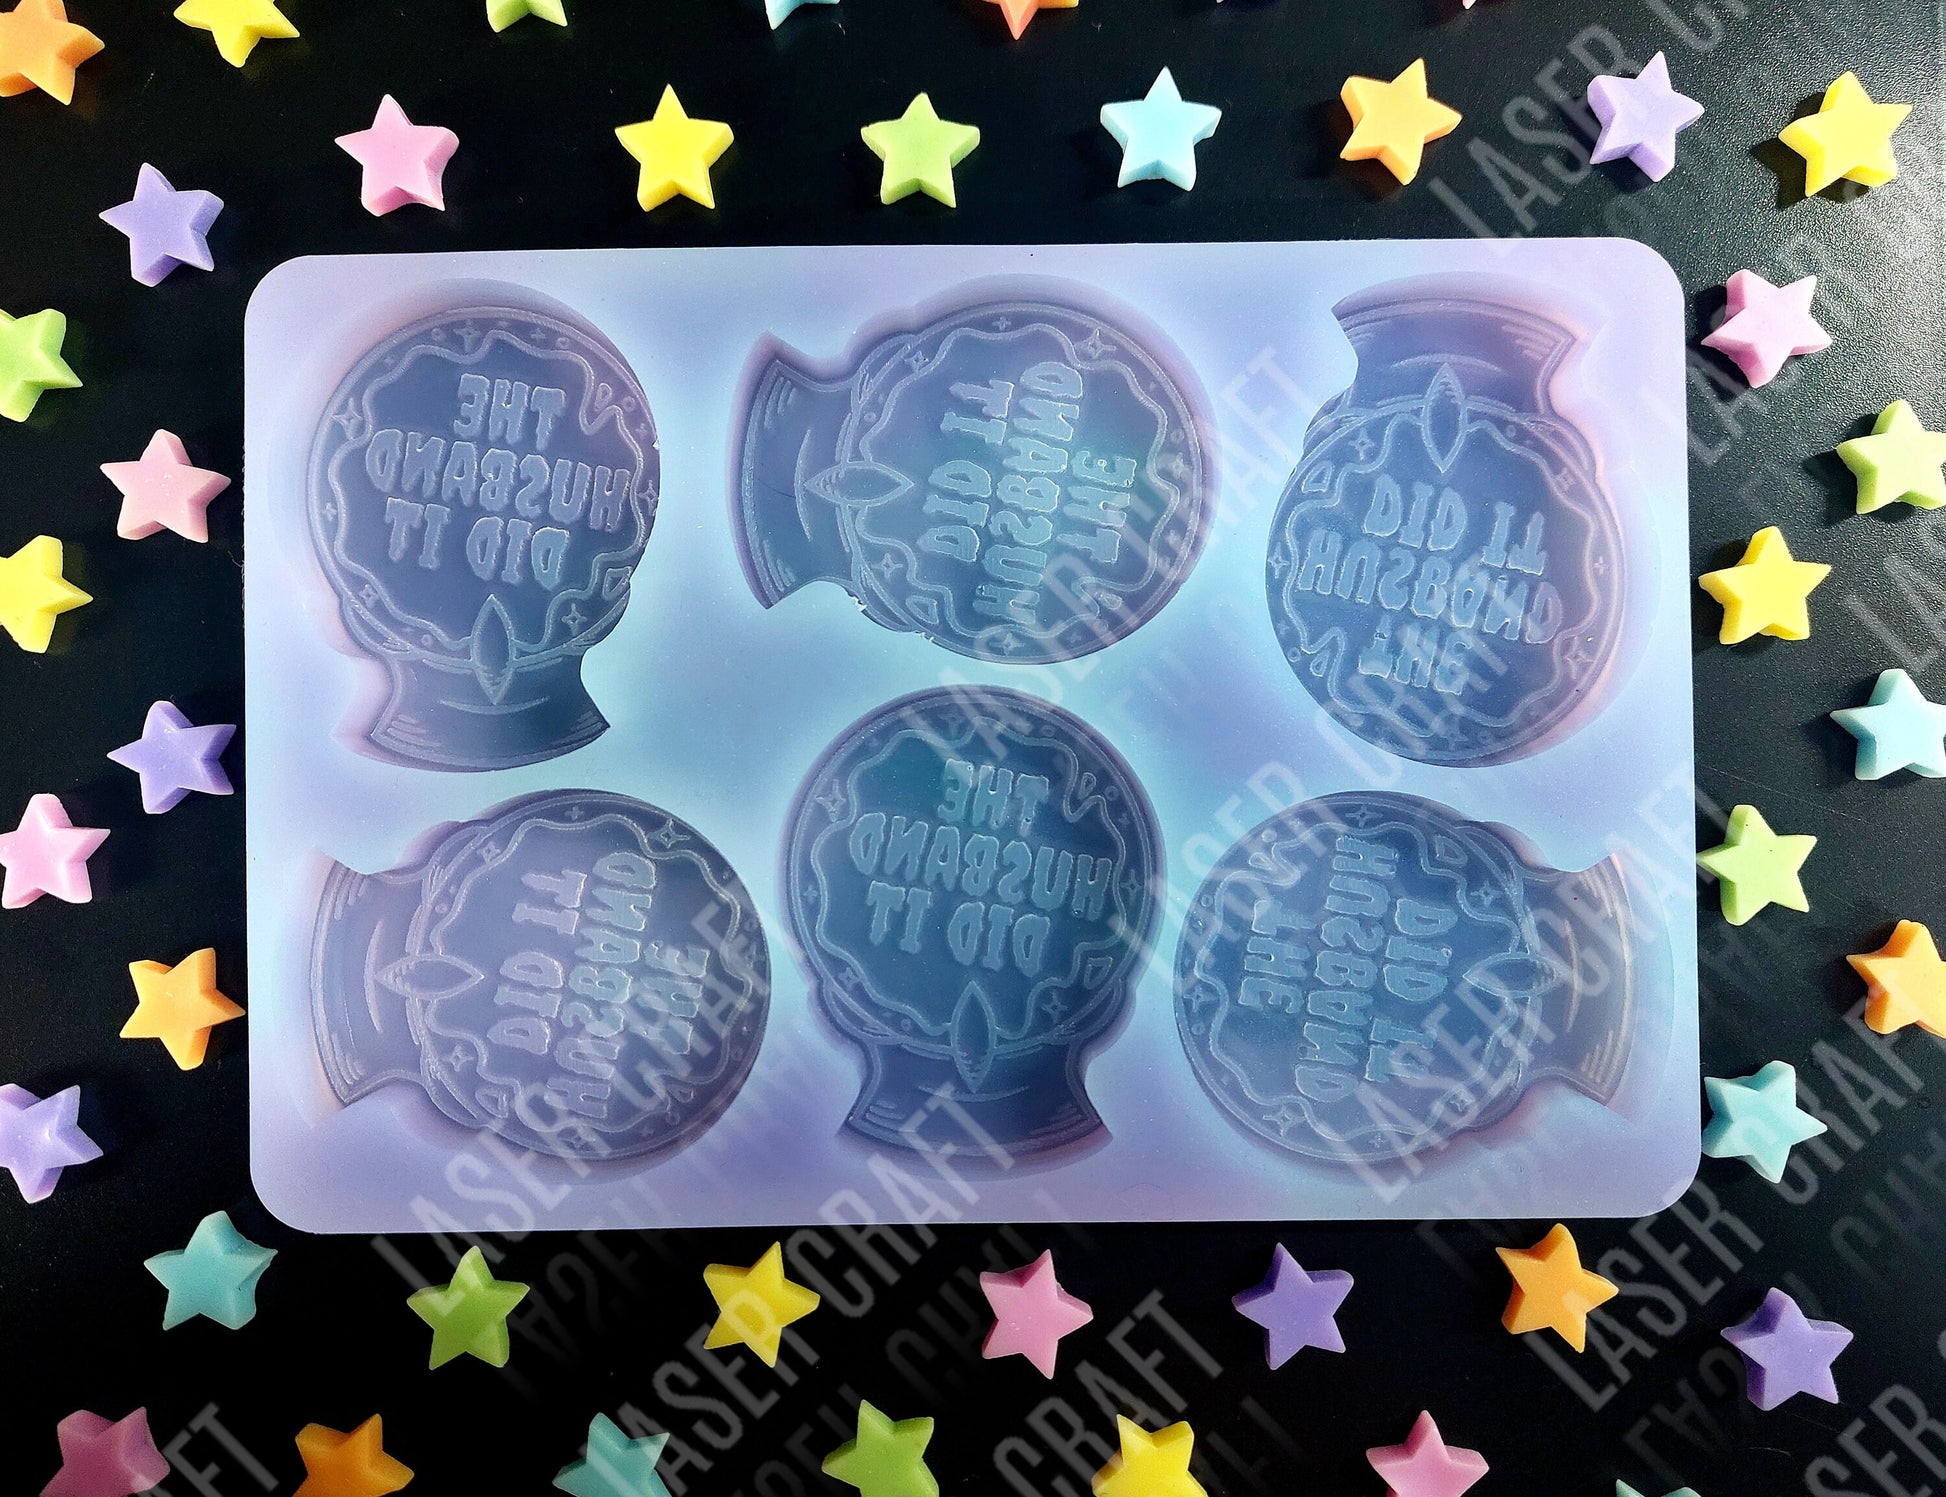 The Husband Crystal Ball 6 Cell Silicone Mould for wax, resin etc